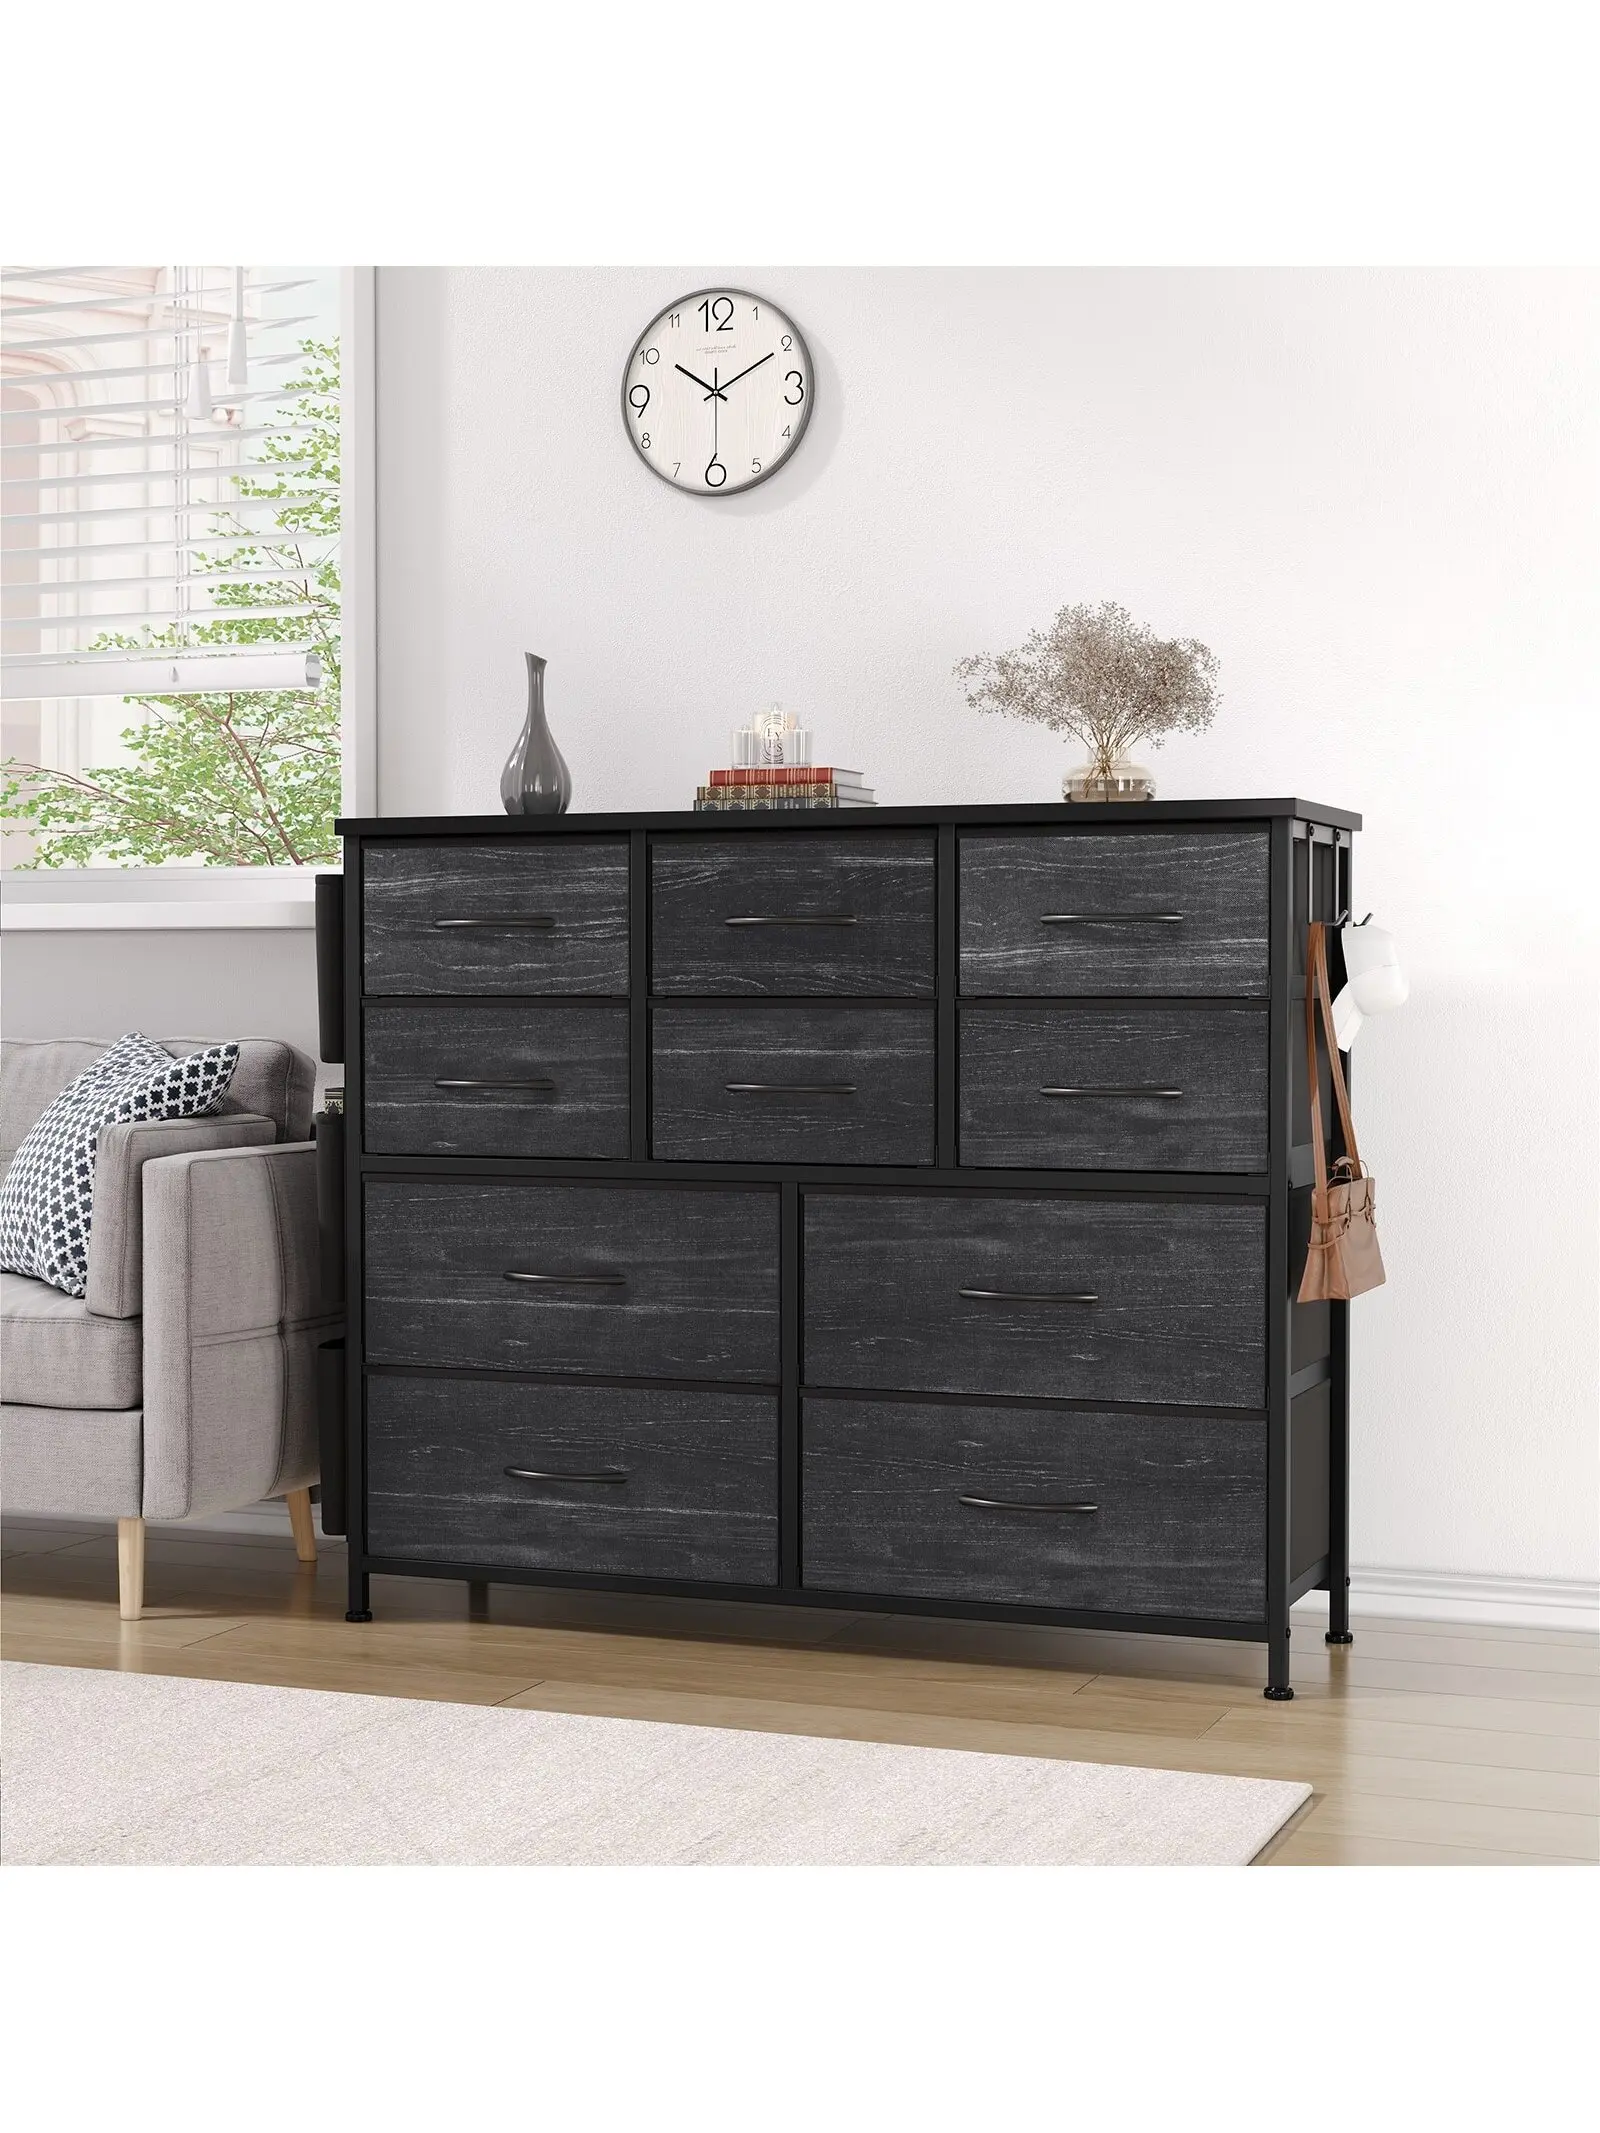 

Dresser for Bedroom with 10 Drawer, Dressers & Chests of Drawers for Hallway, Entryway, Storage Organizer Unit with Fabric